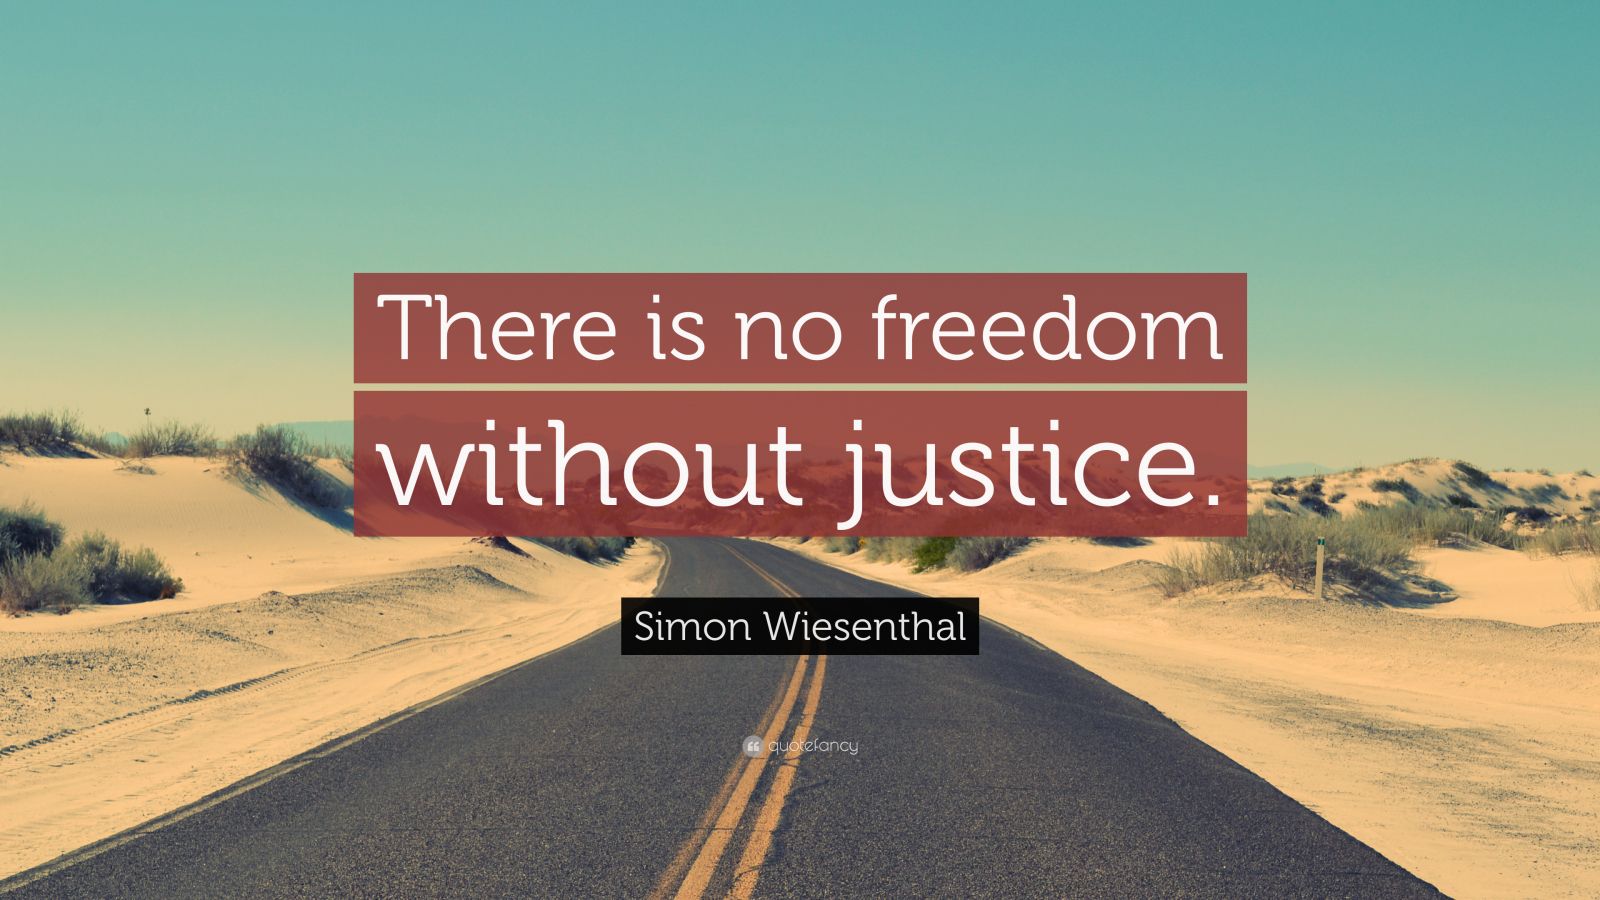 Top 30 Simon Wiesenthal Quotes | 2021 Edition | Free Images - QuoteFancy